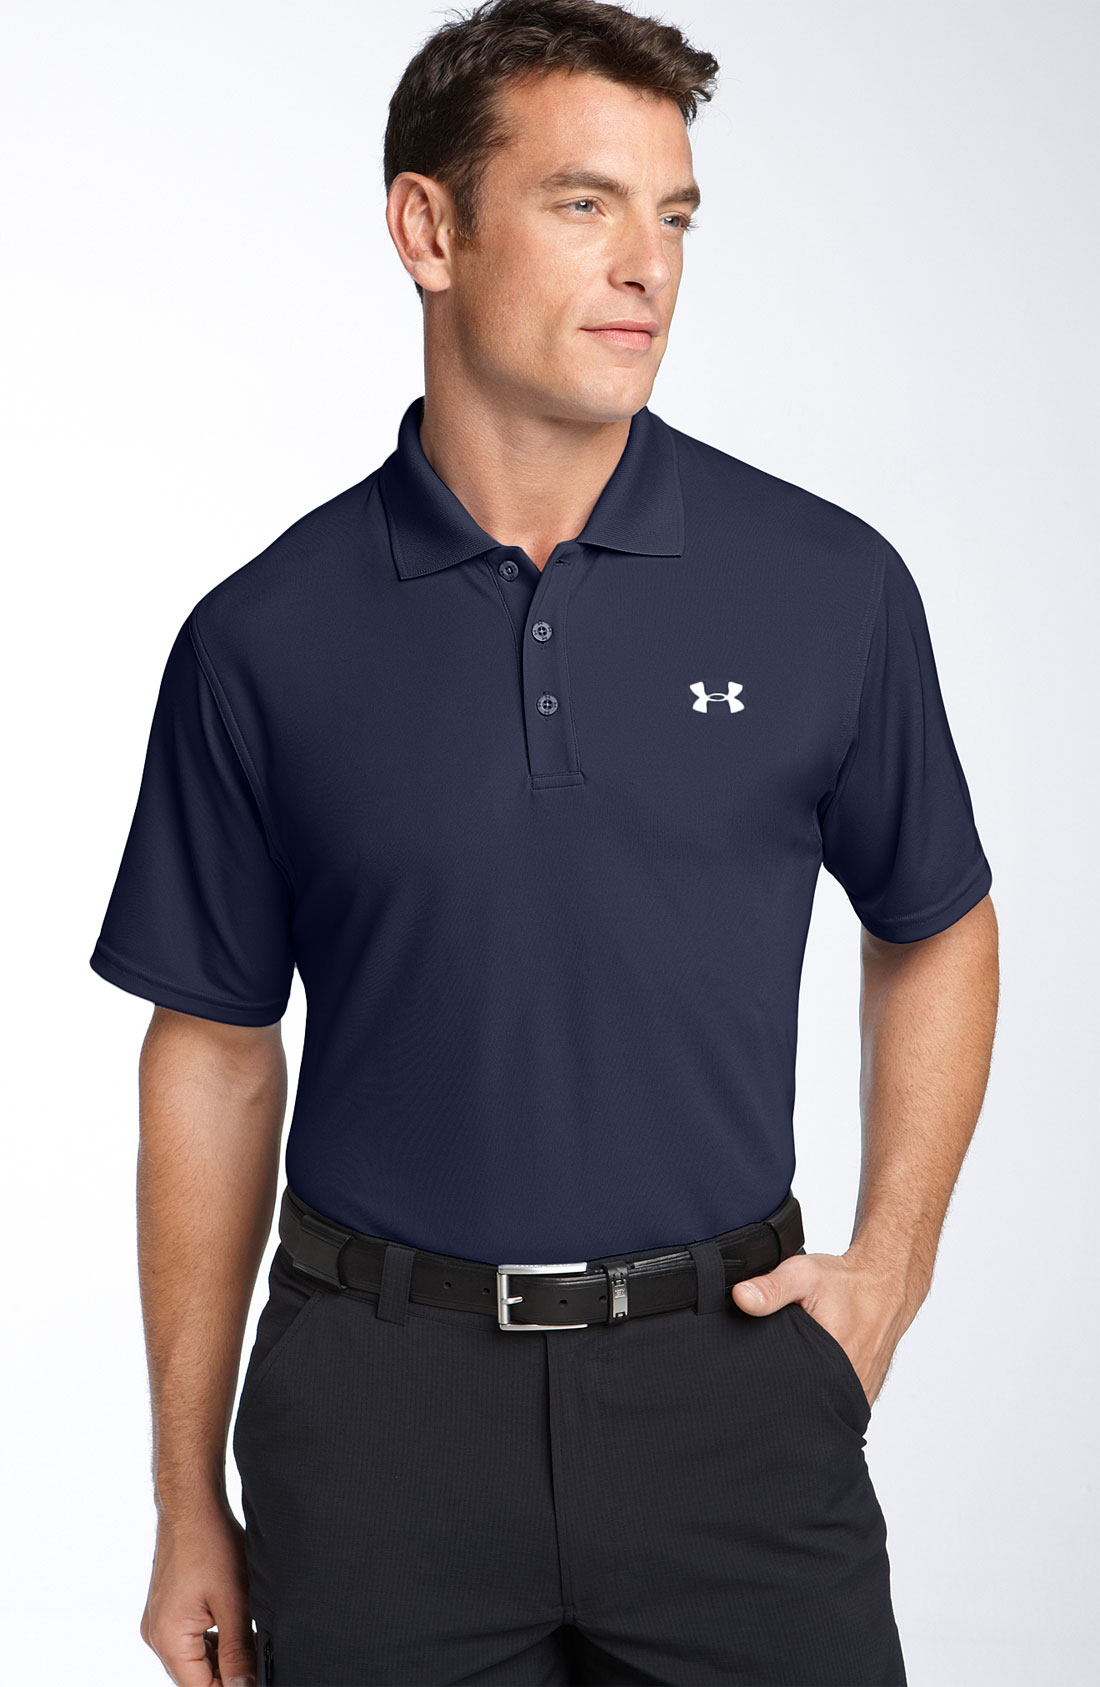 Under Armour Heatgear® Uv Protection Performance Polo in Blue for Men